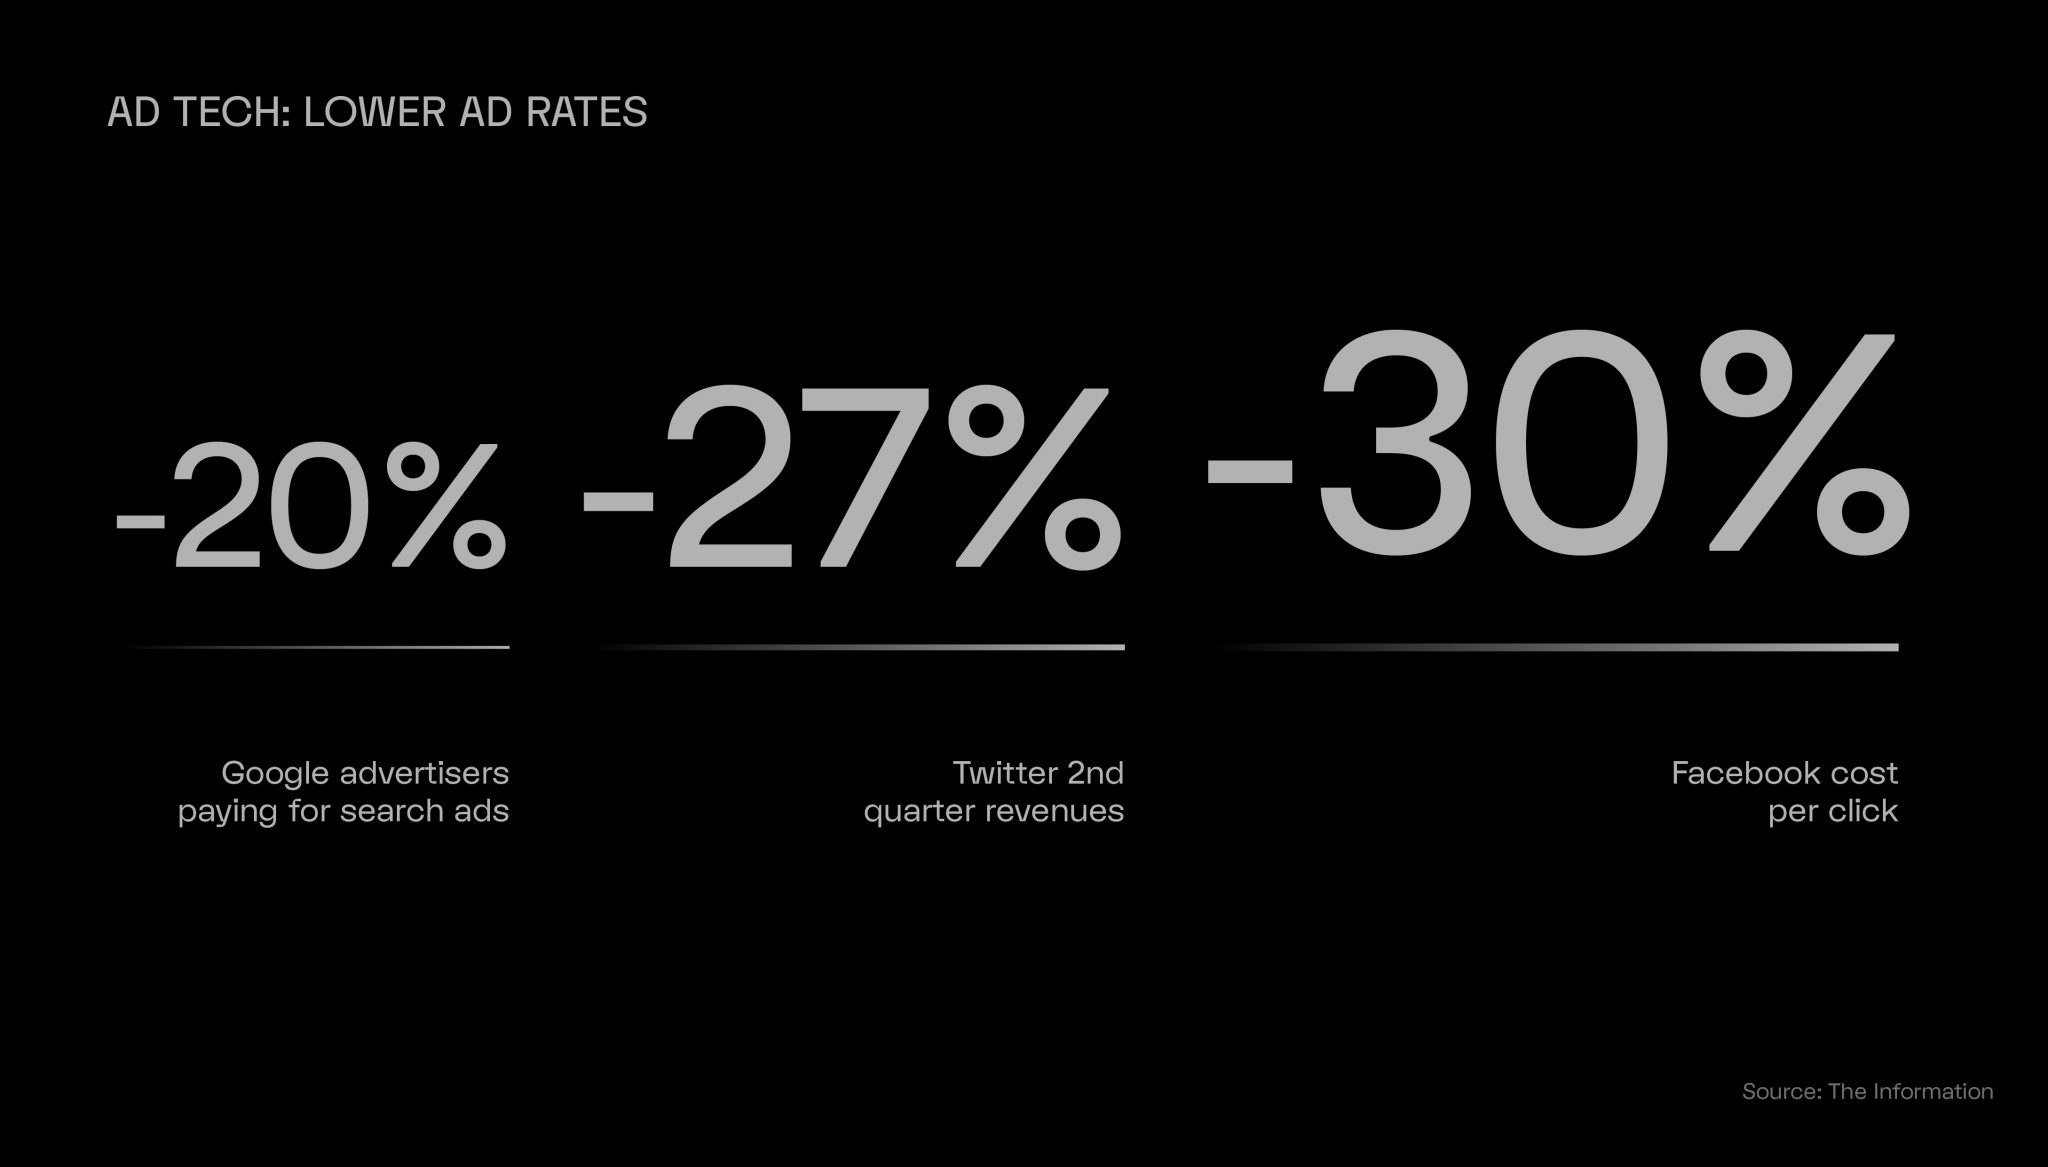 Photo showing the lowered ad rates for Twitter, Facebook and Google